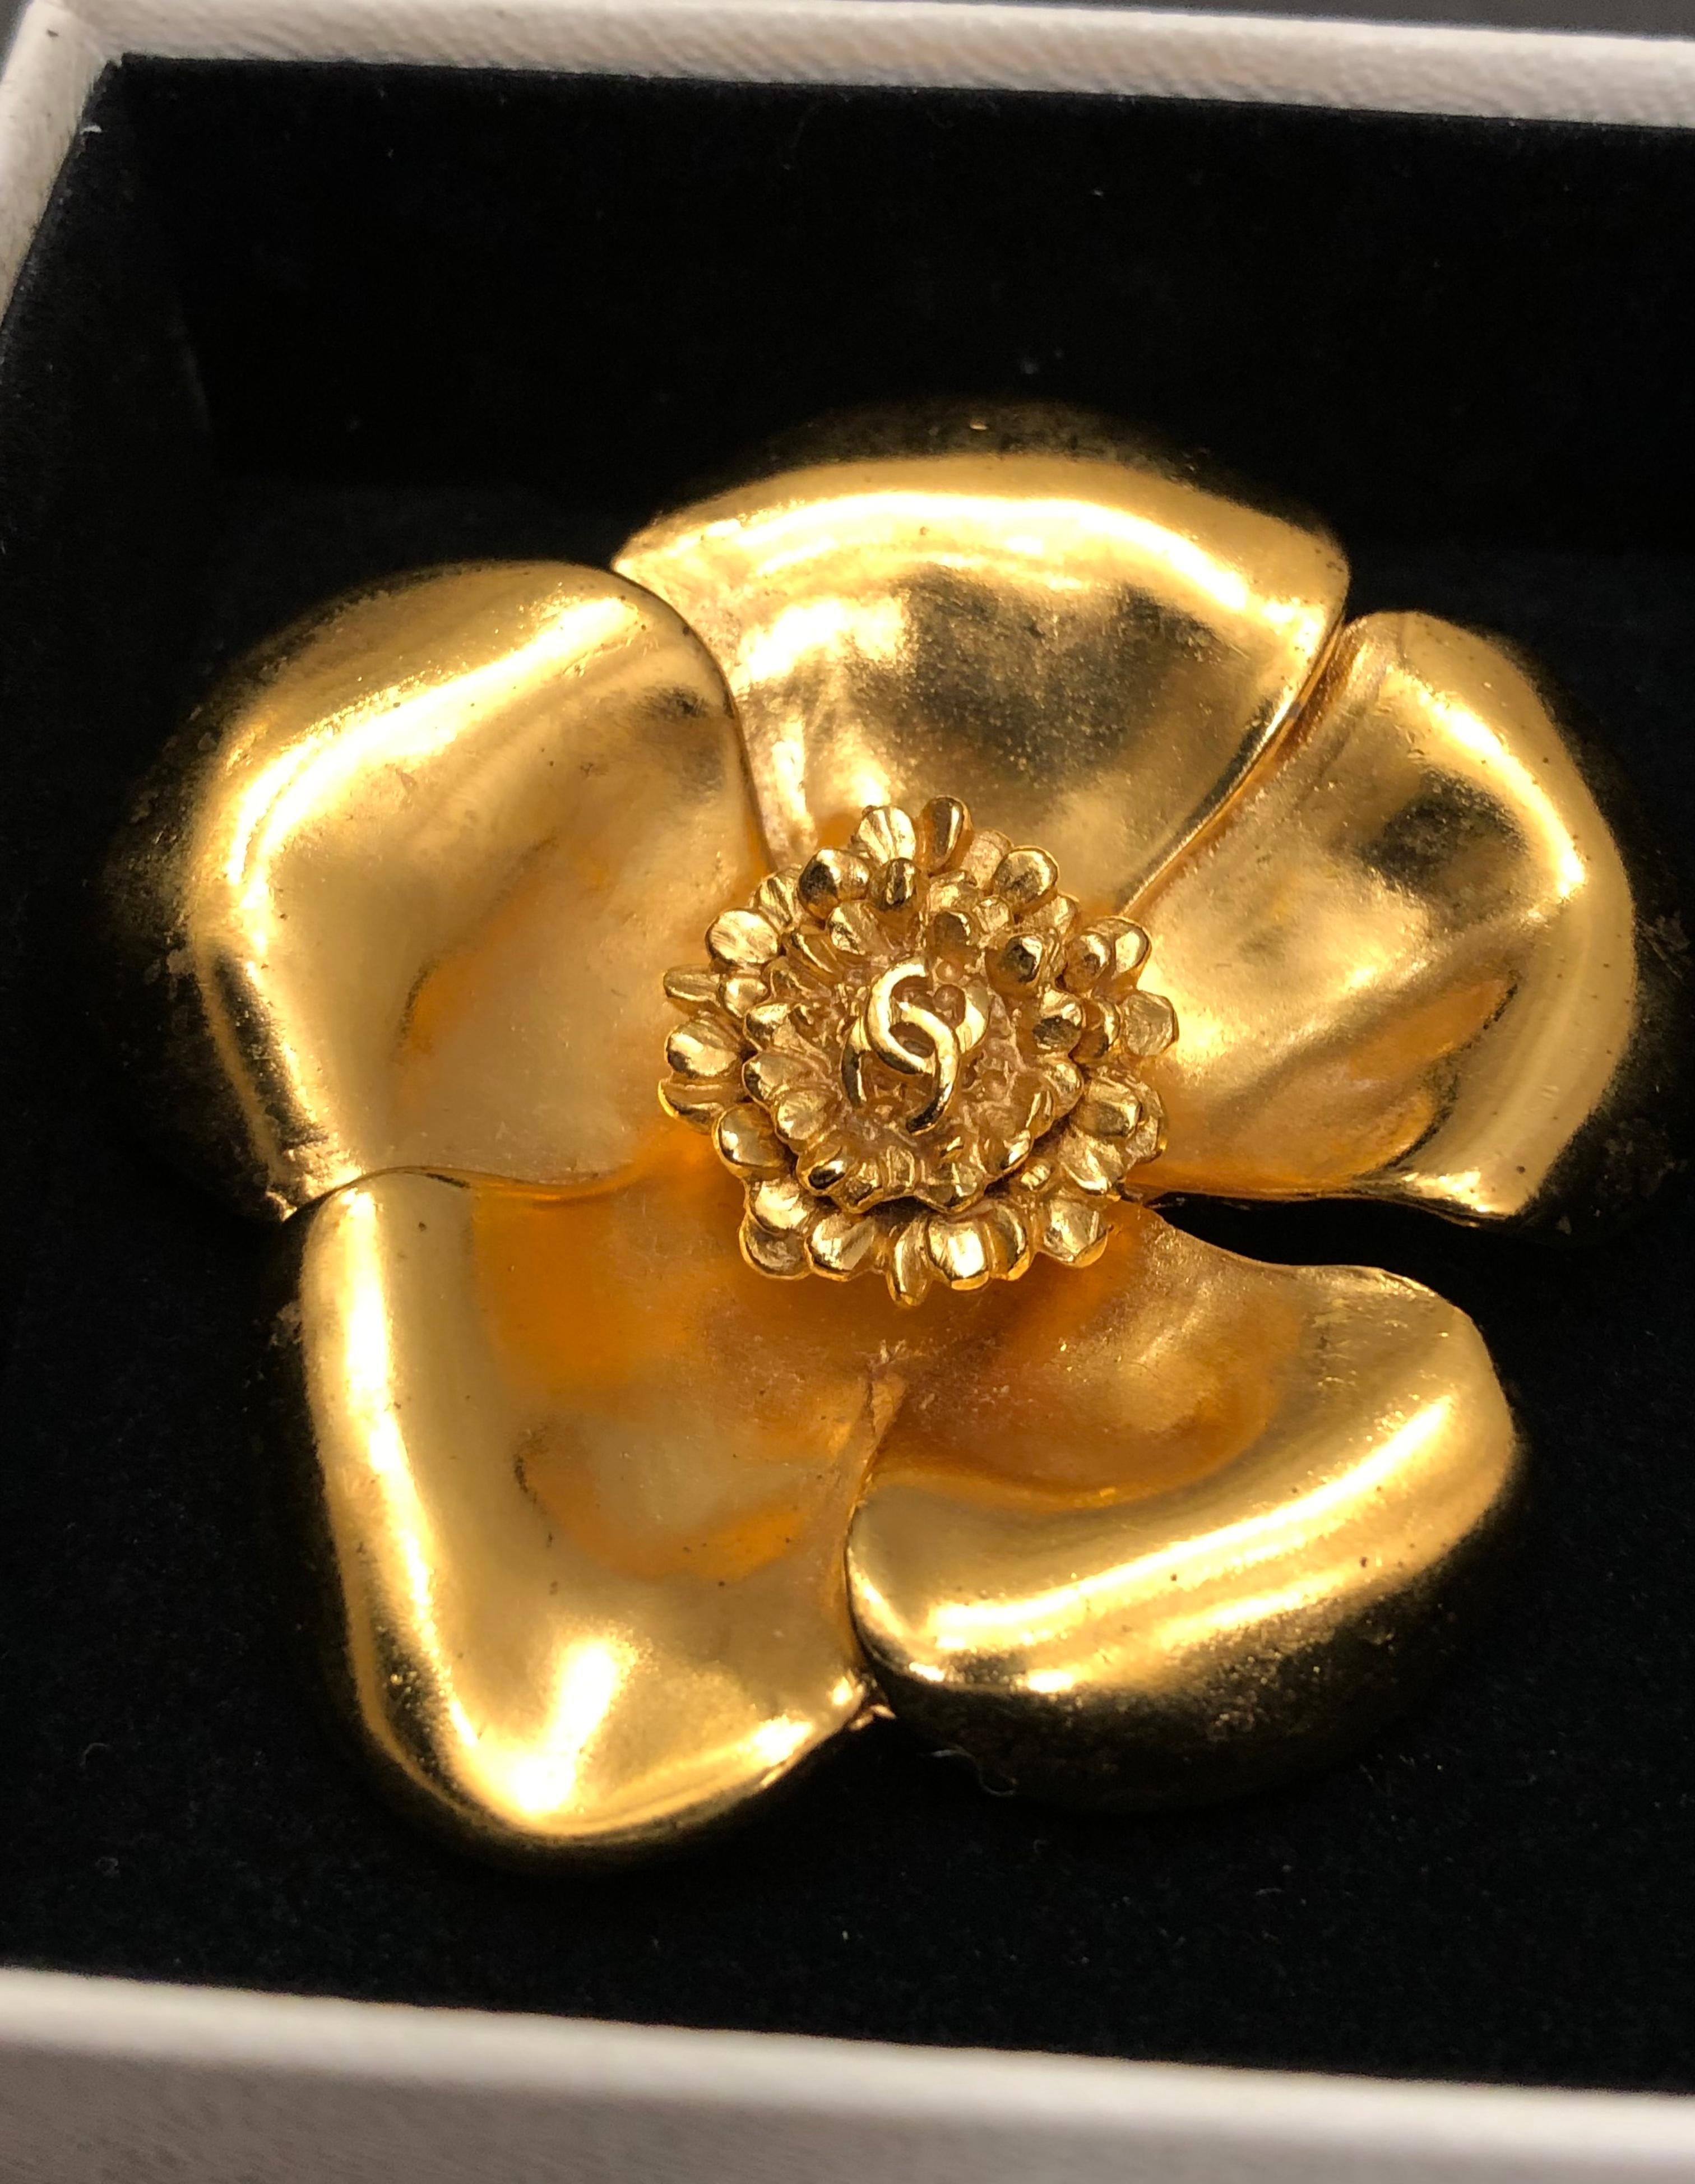 This vintage CHANEL camellia brooch is crafted of gold toned metal featuring a CC logo at the center. Stamped CHANEL 99P made in France. Measures approximately 5.2 cm in diameter at the widest points. Comes with box. 

Condition: Very good vintage